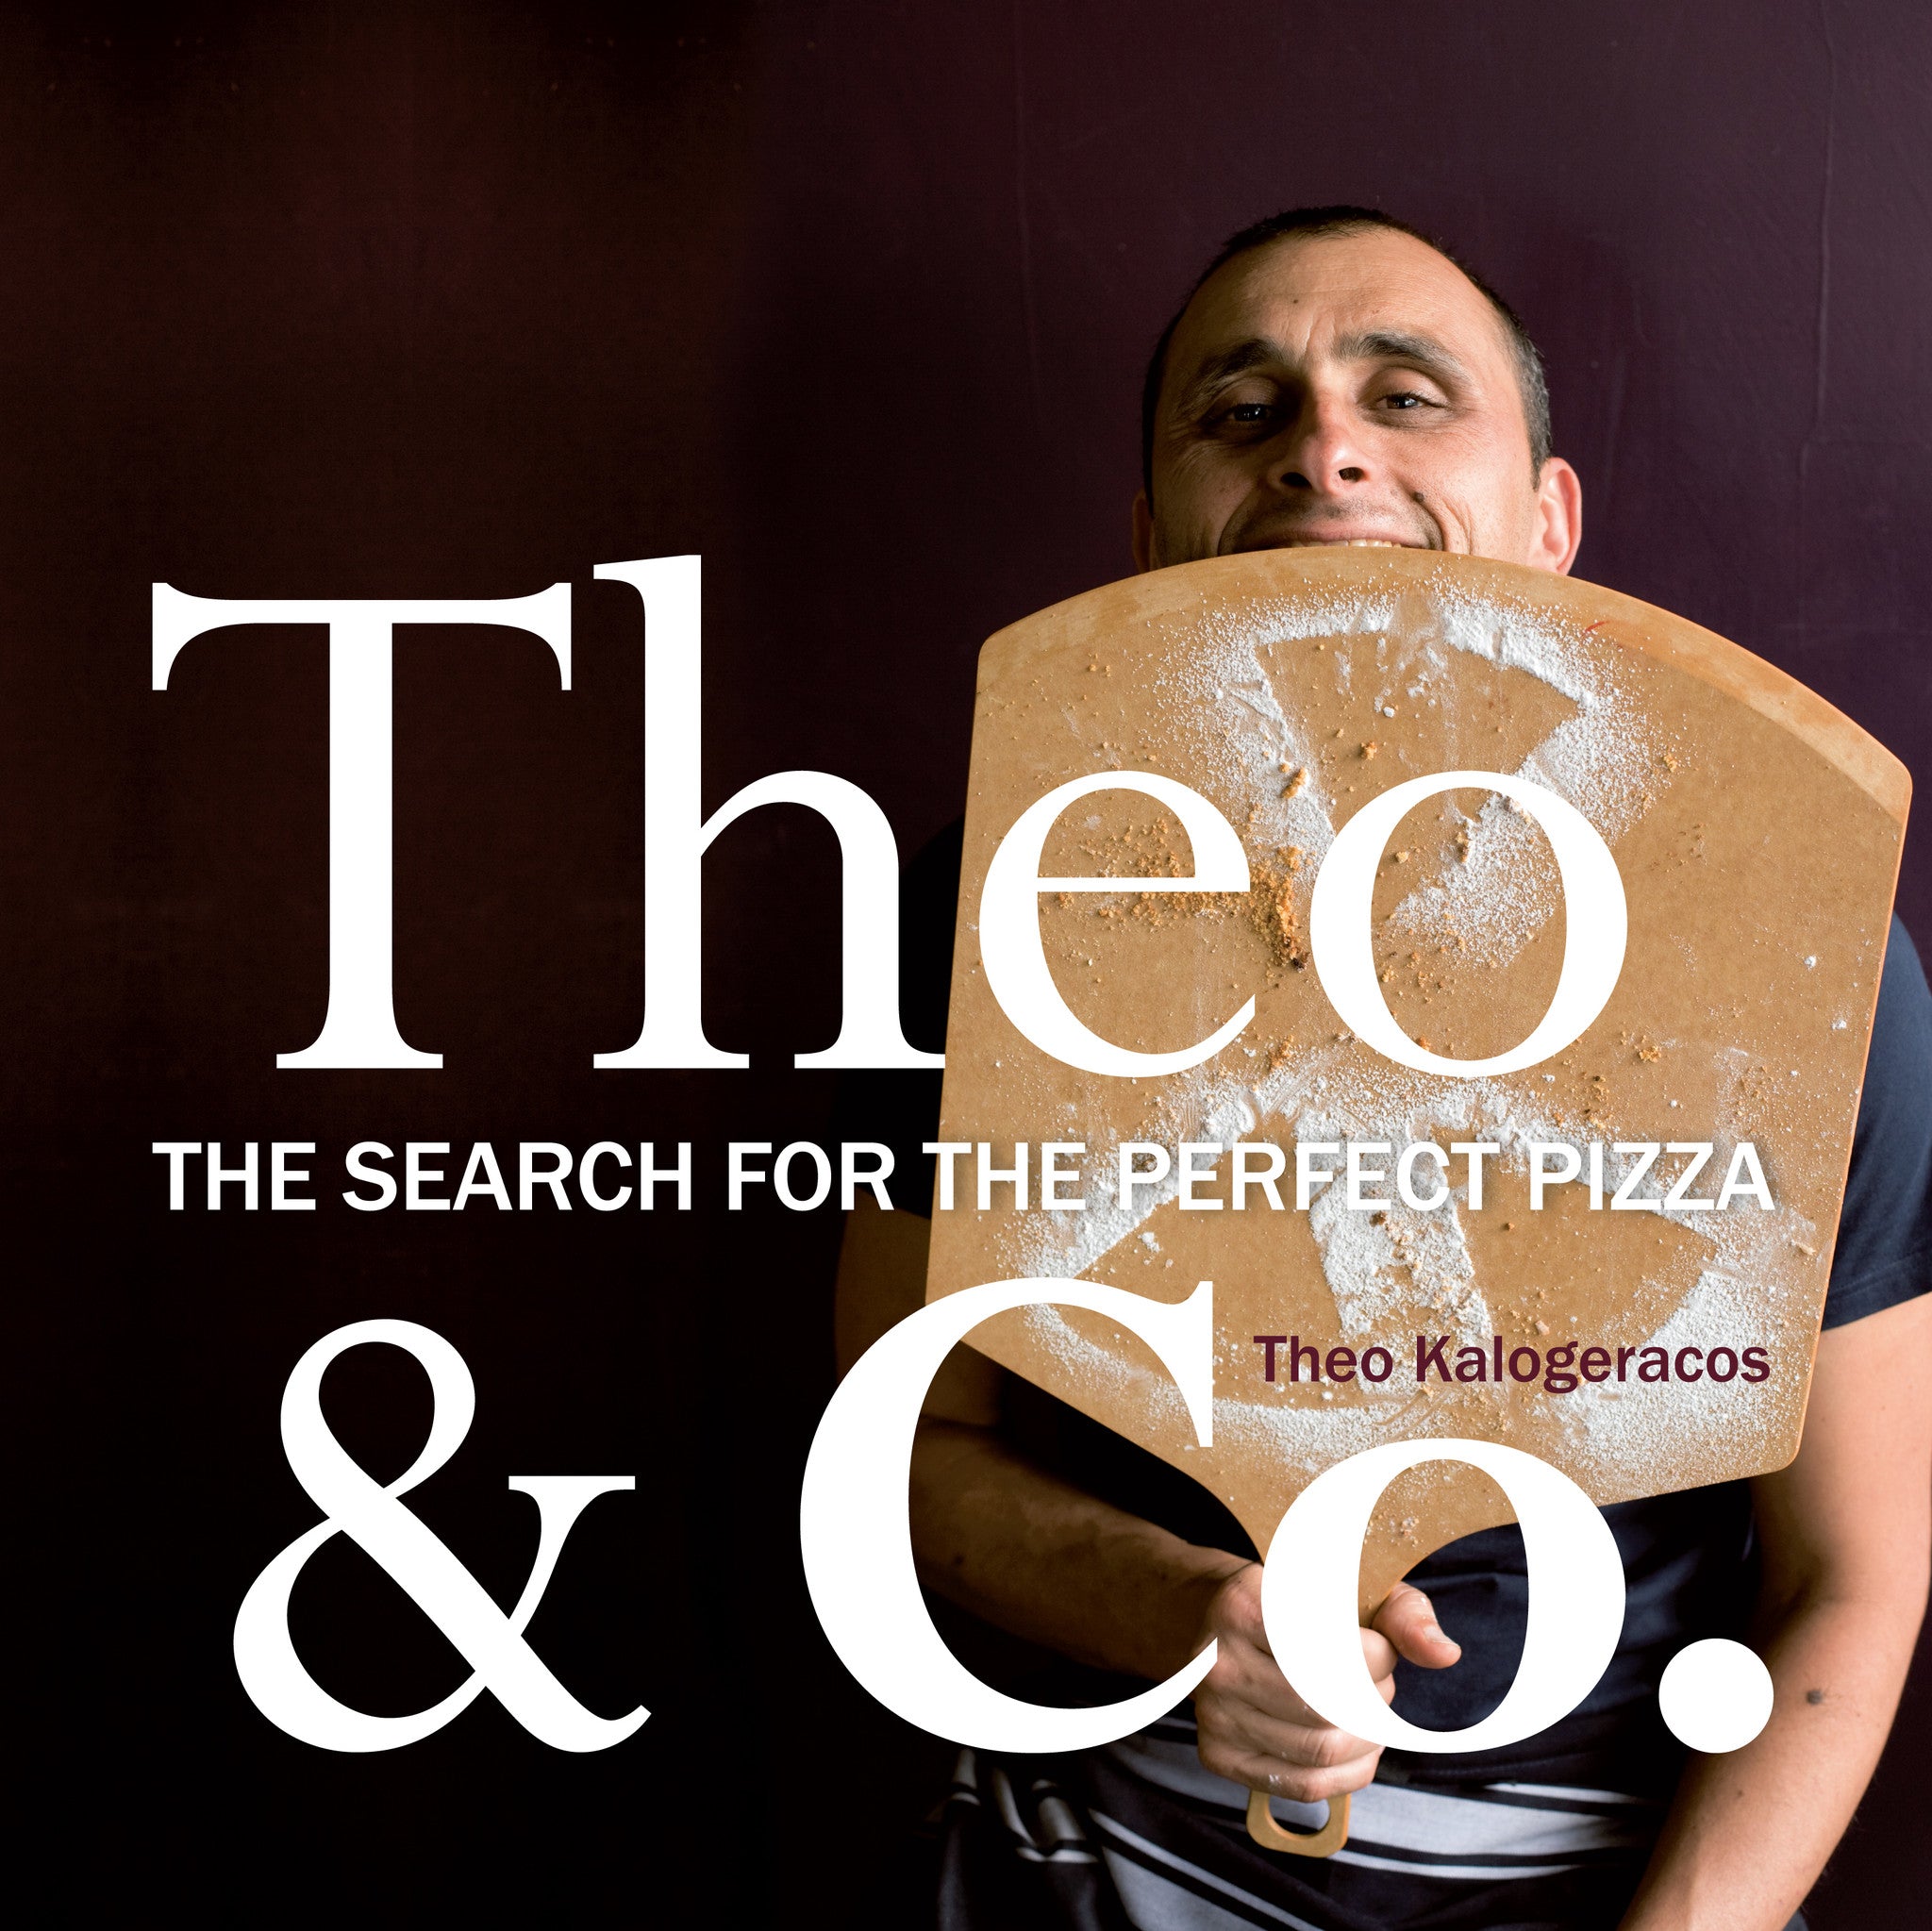 Theo & Co.: The Search for the Perfect Pizza